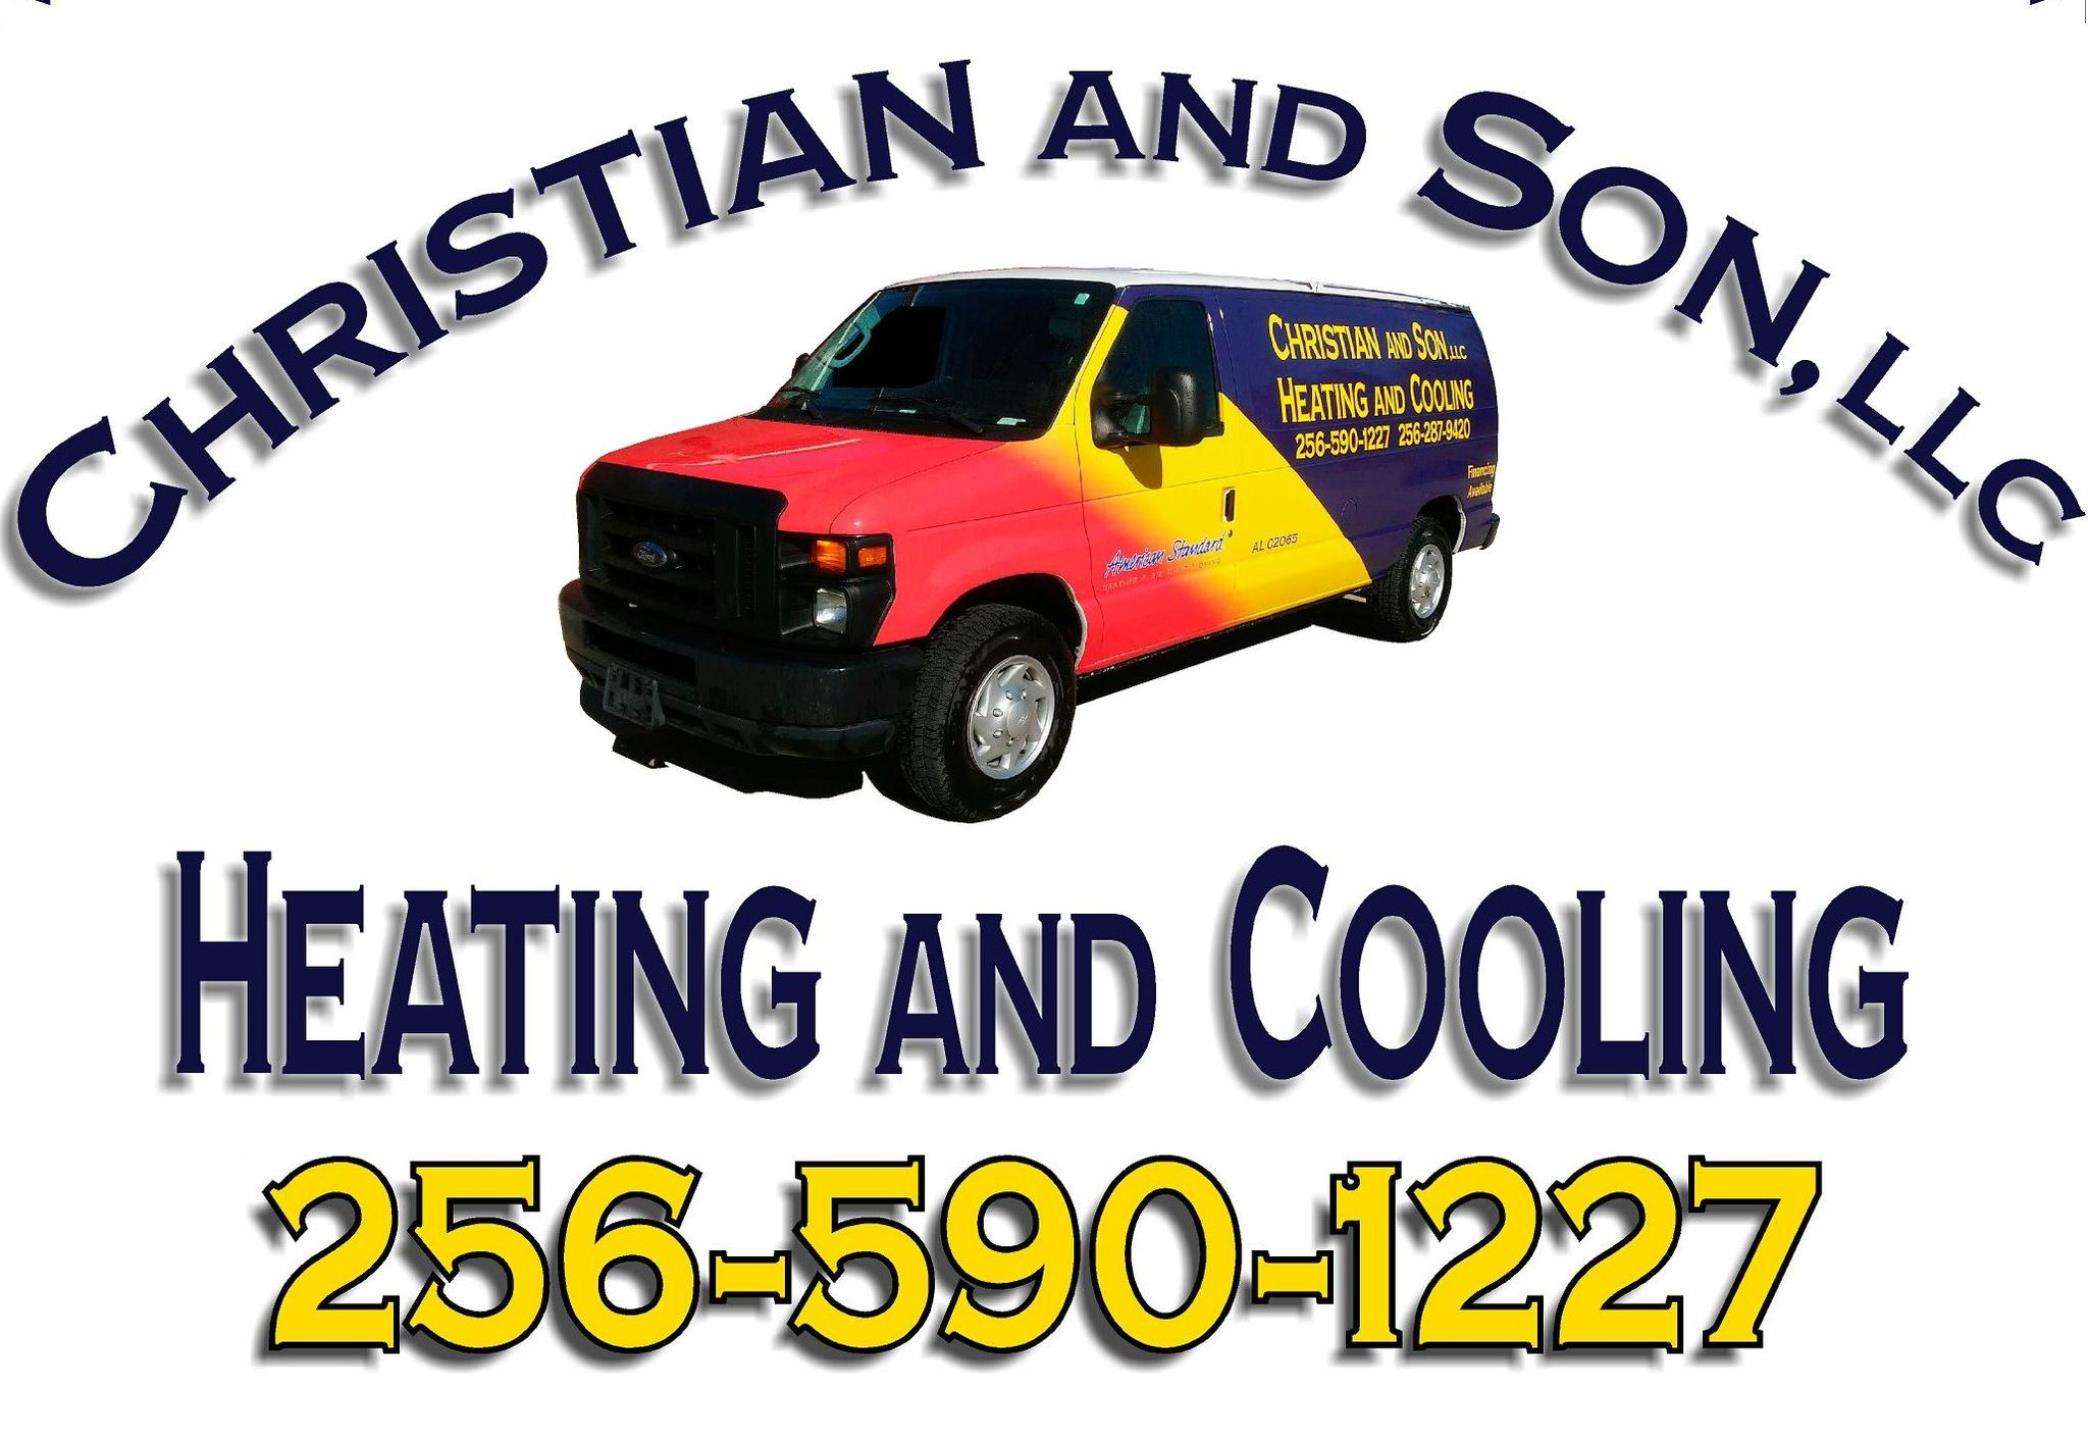 Christian and Son LLC Heating and Cooling Logo